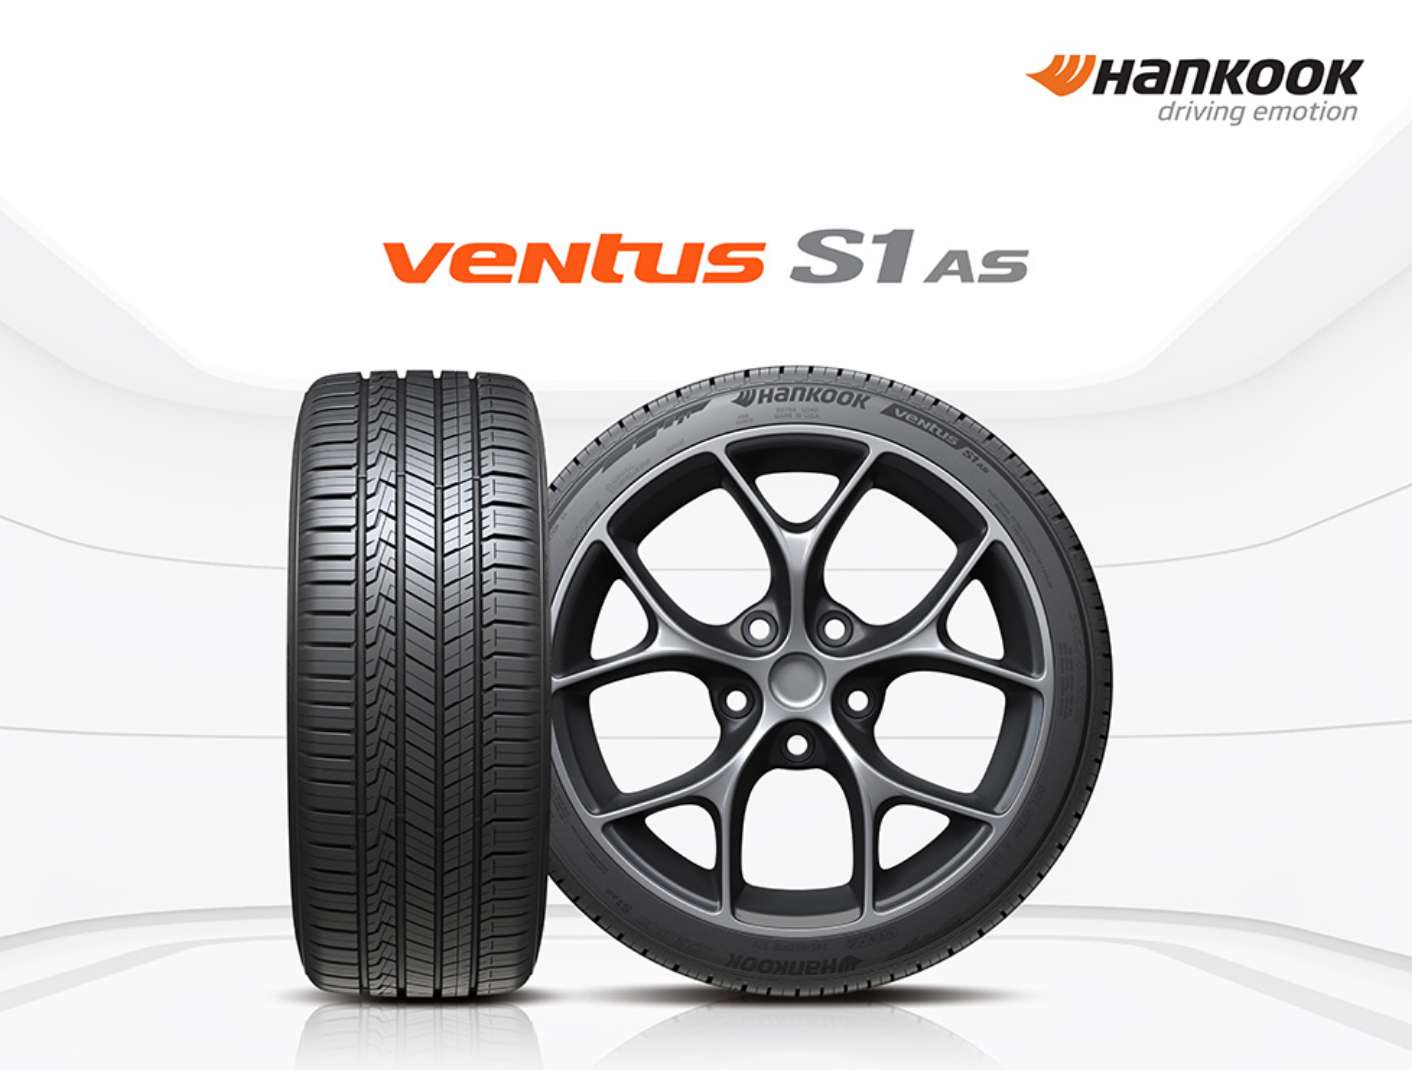 Hankook Tire launches high-performance all-season Ventus S1 AS